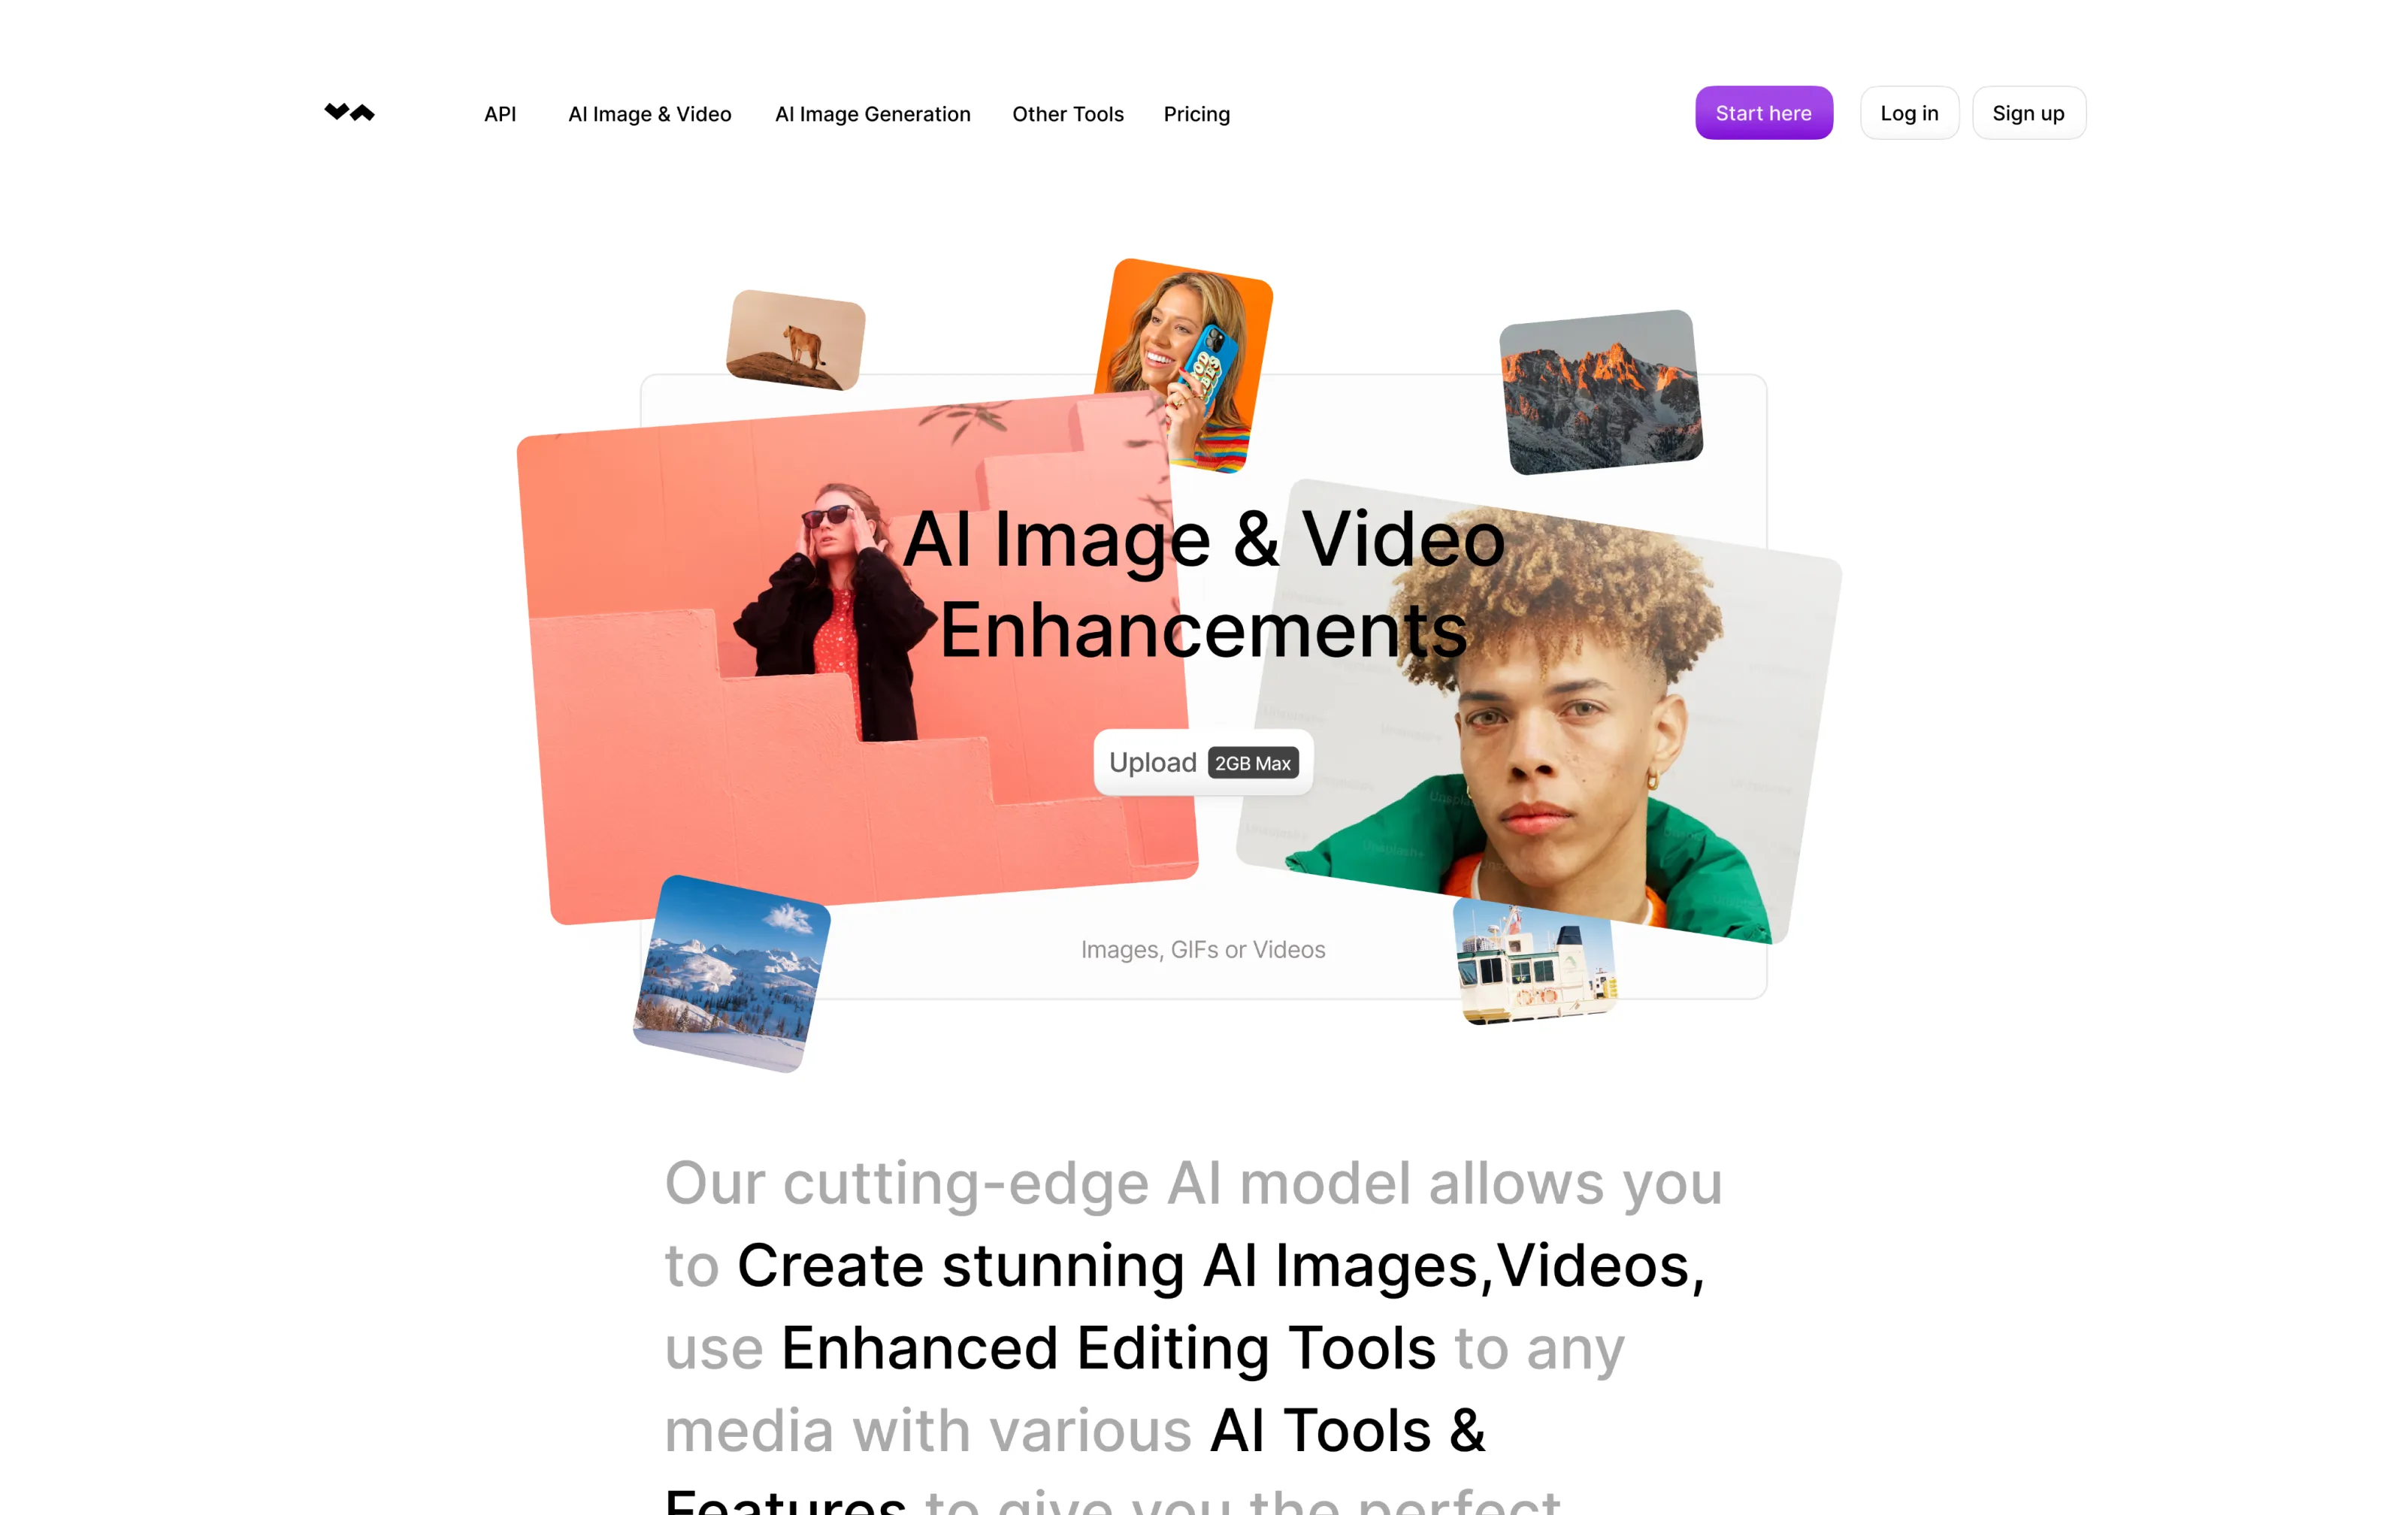 Landing page hero section for a AI Image uploader